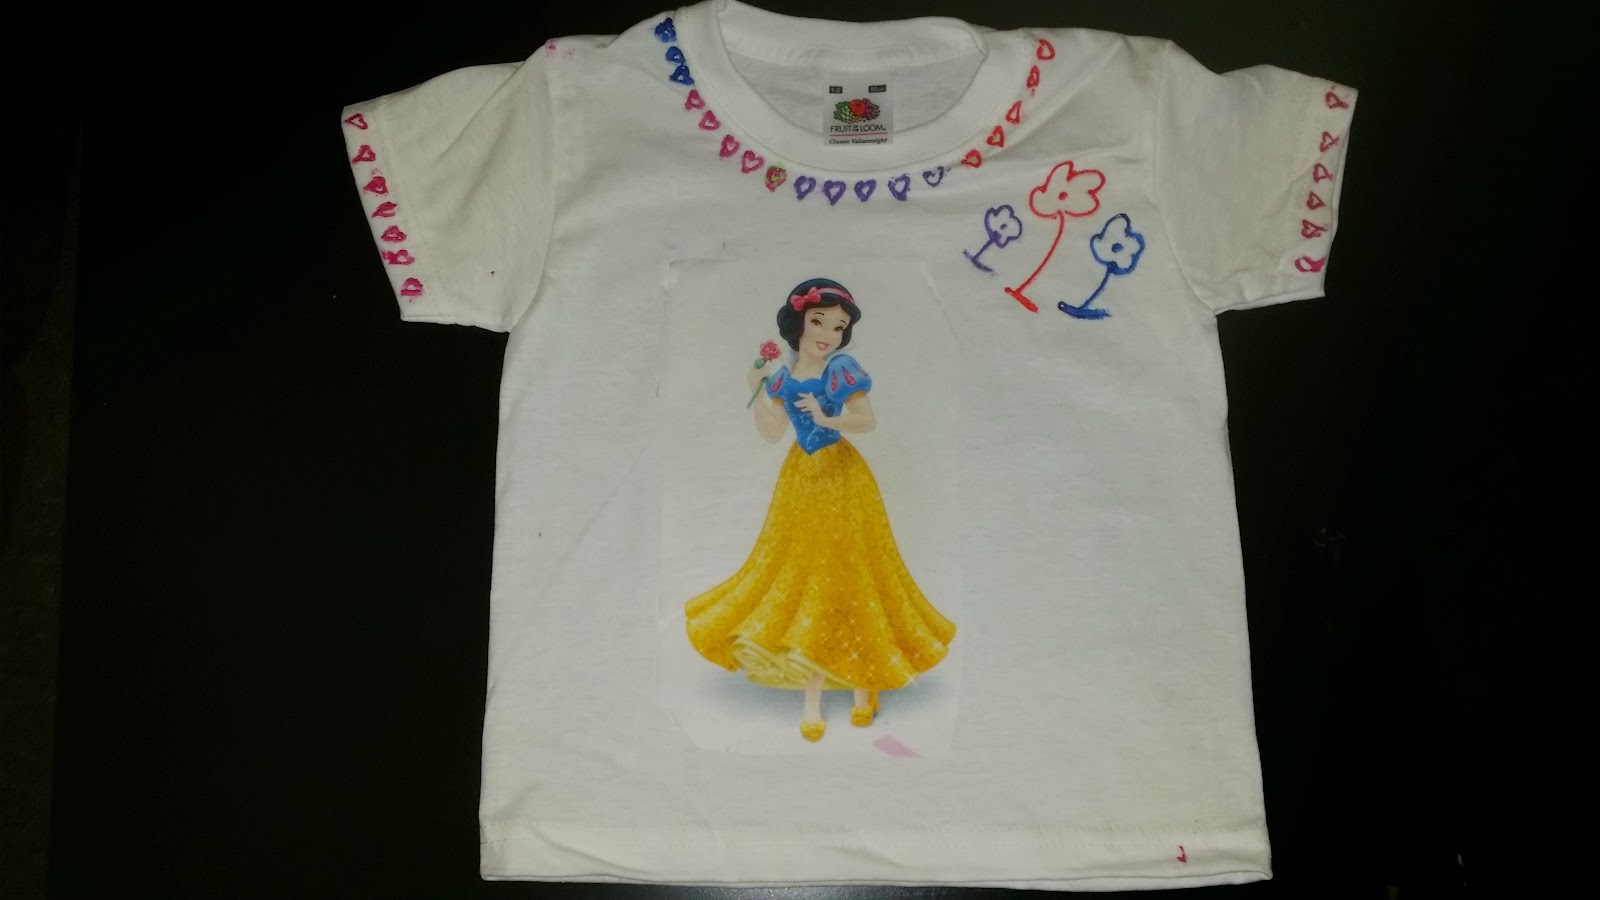 Ready to wear Designed T-shirt :)